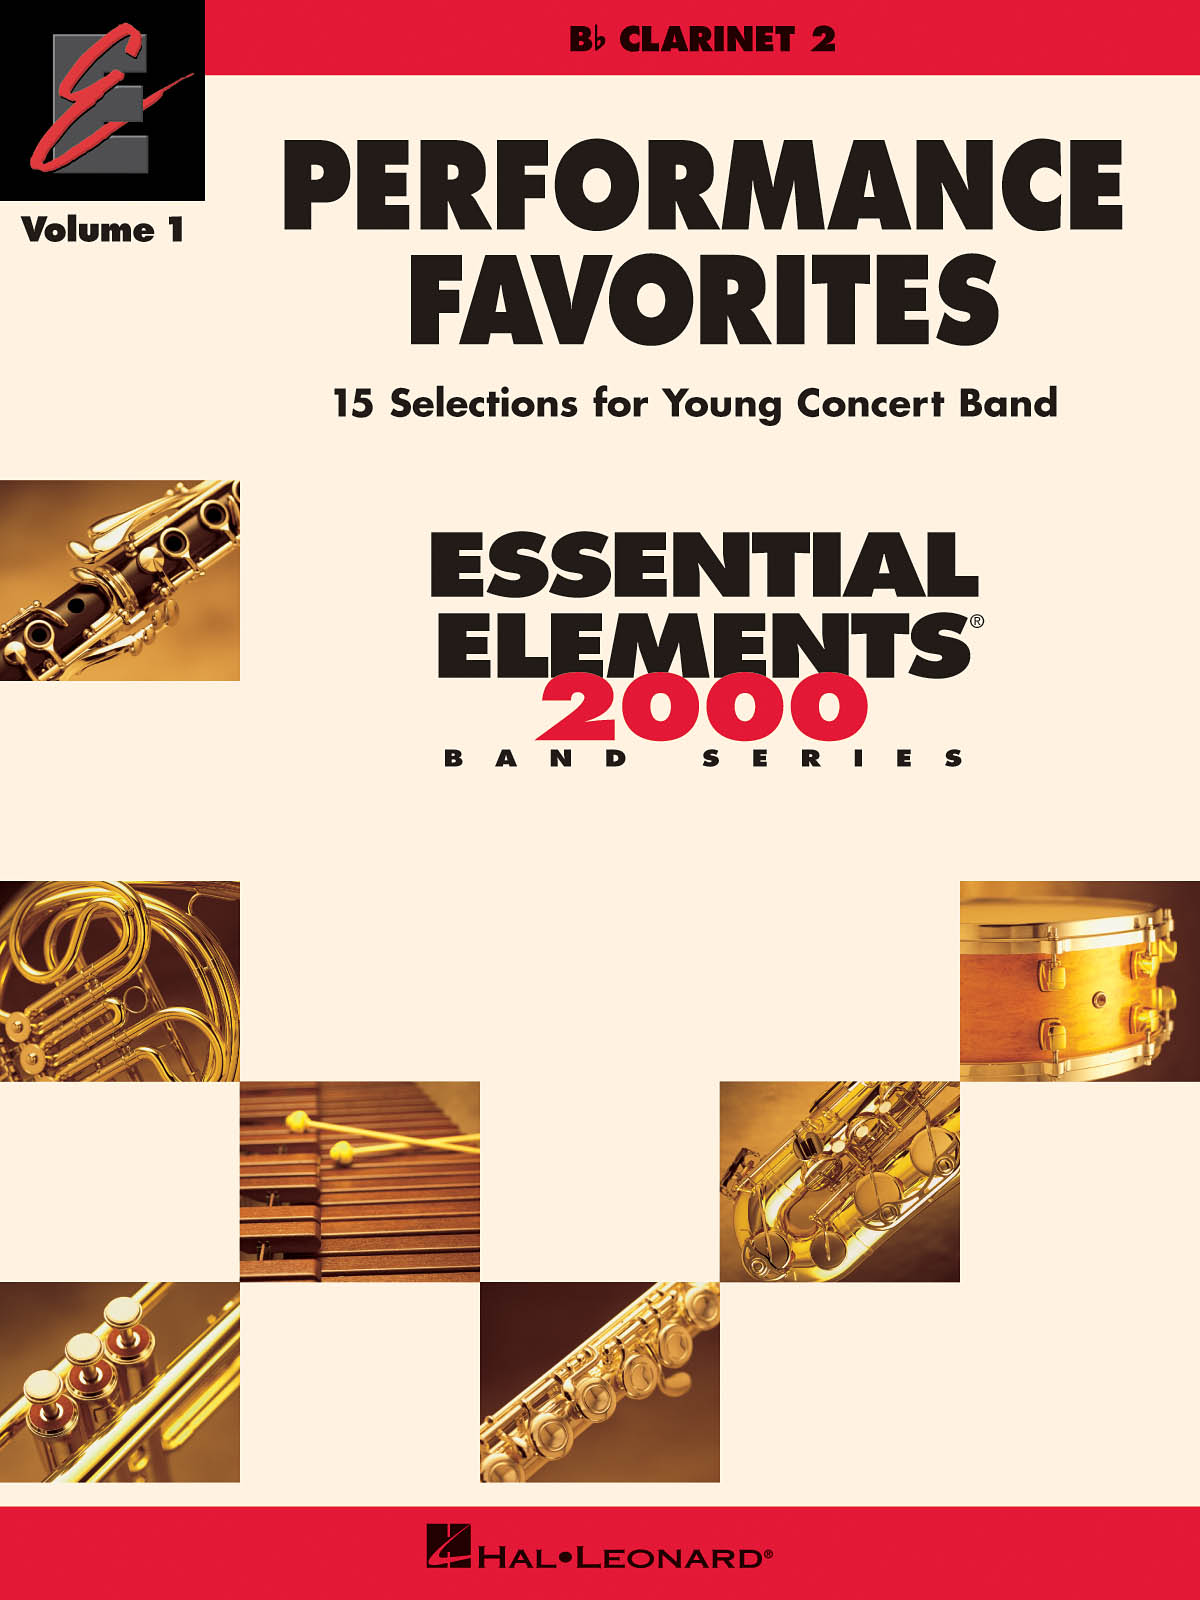 Performance Favorites Vol. 1 - Clarinet 2 - 15 Selections for Young Concert Band - noty na klarinet